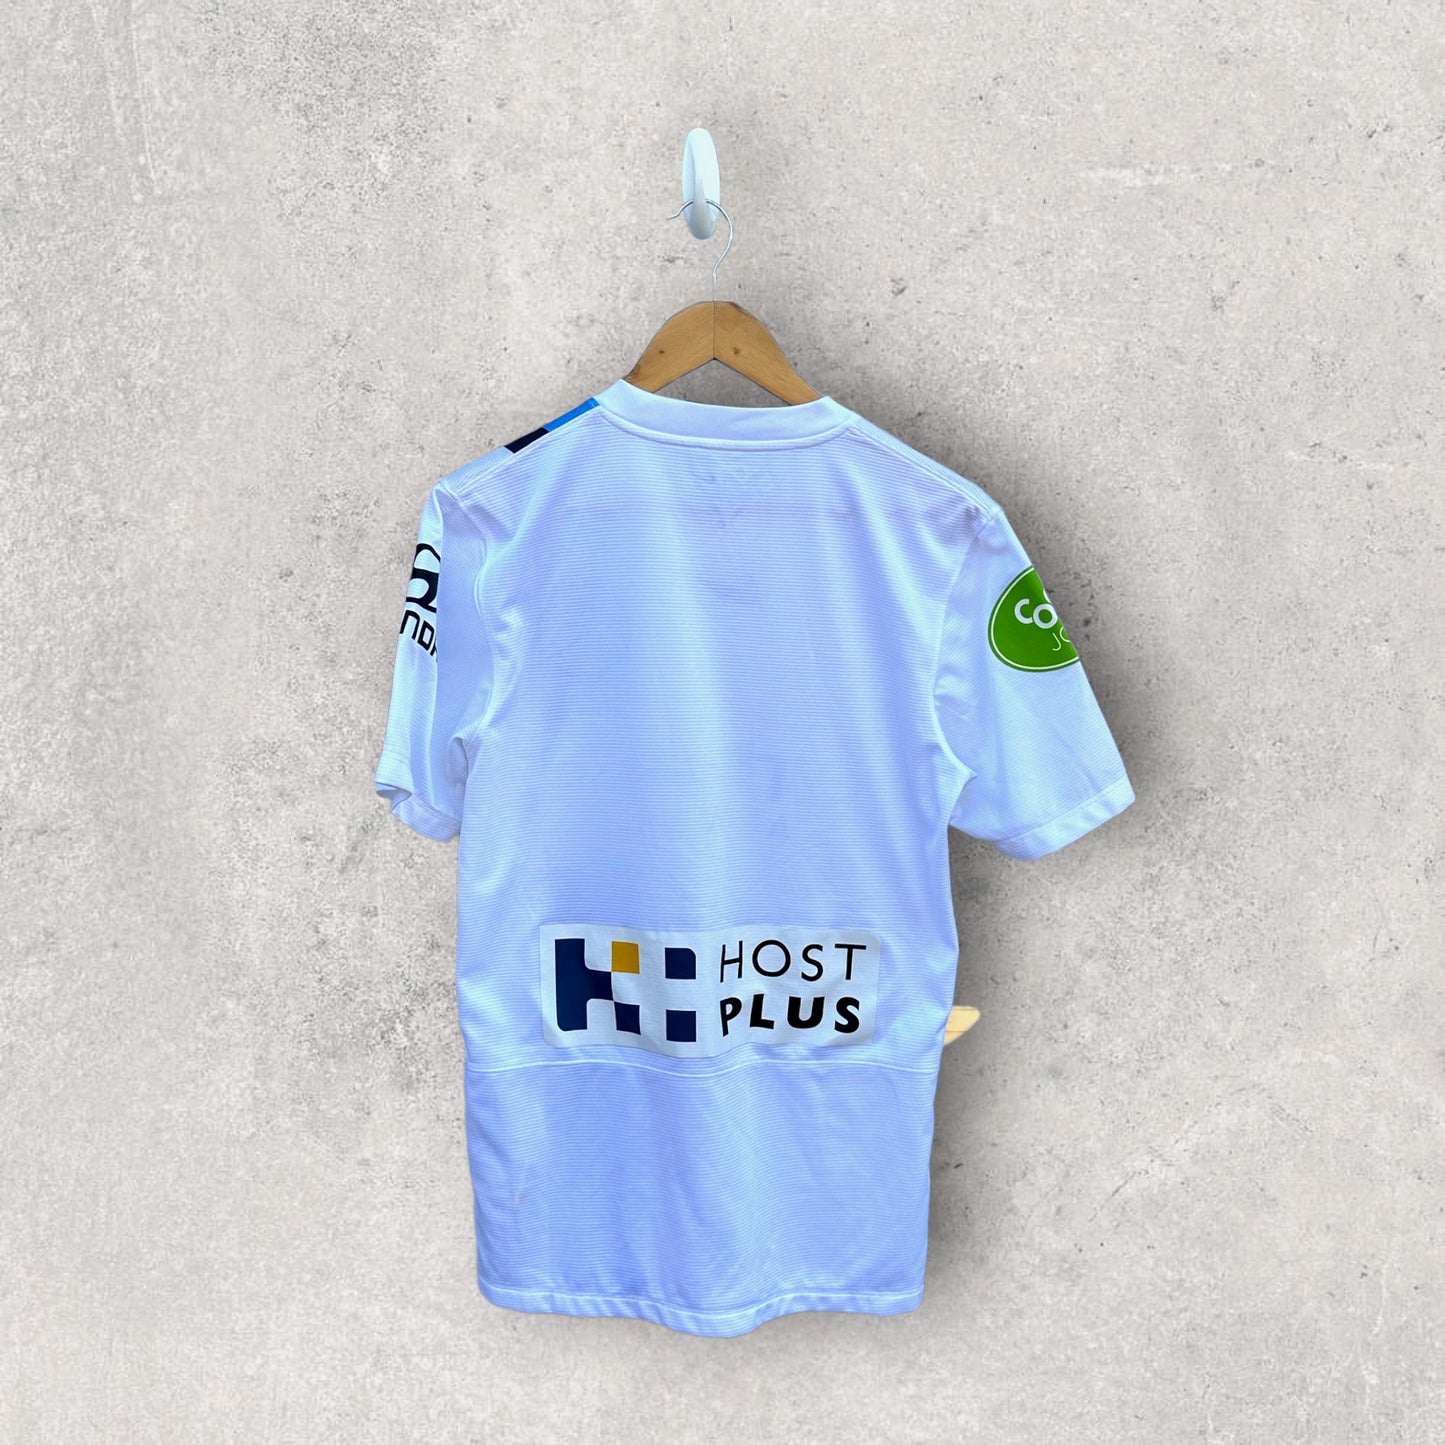 MELBOURNE CITY 2015-2016 HOME JERSEY